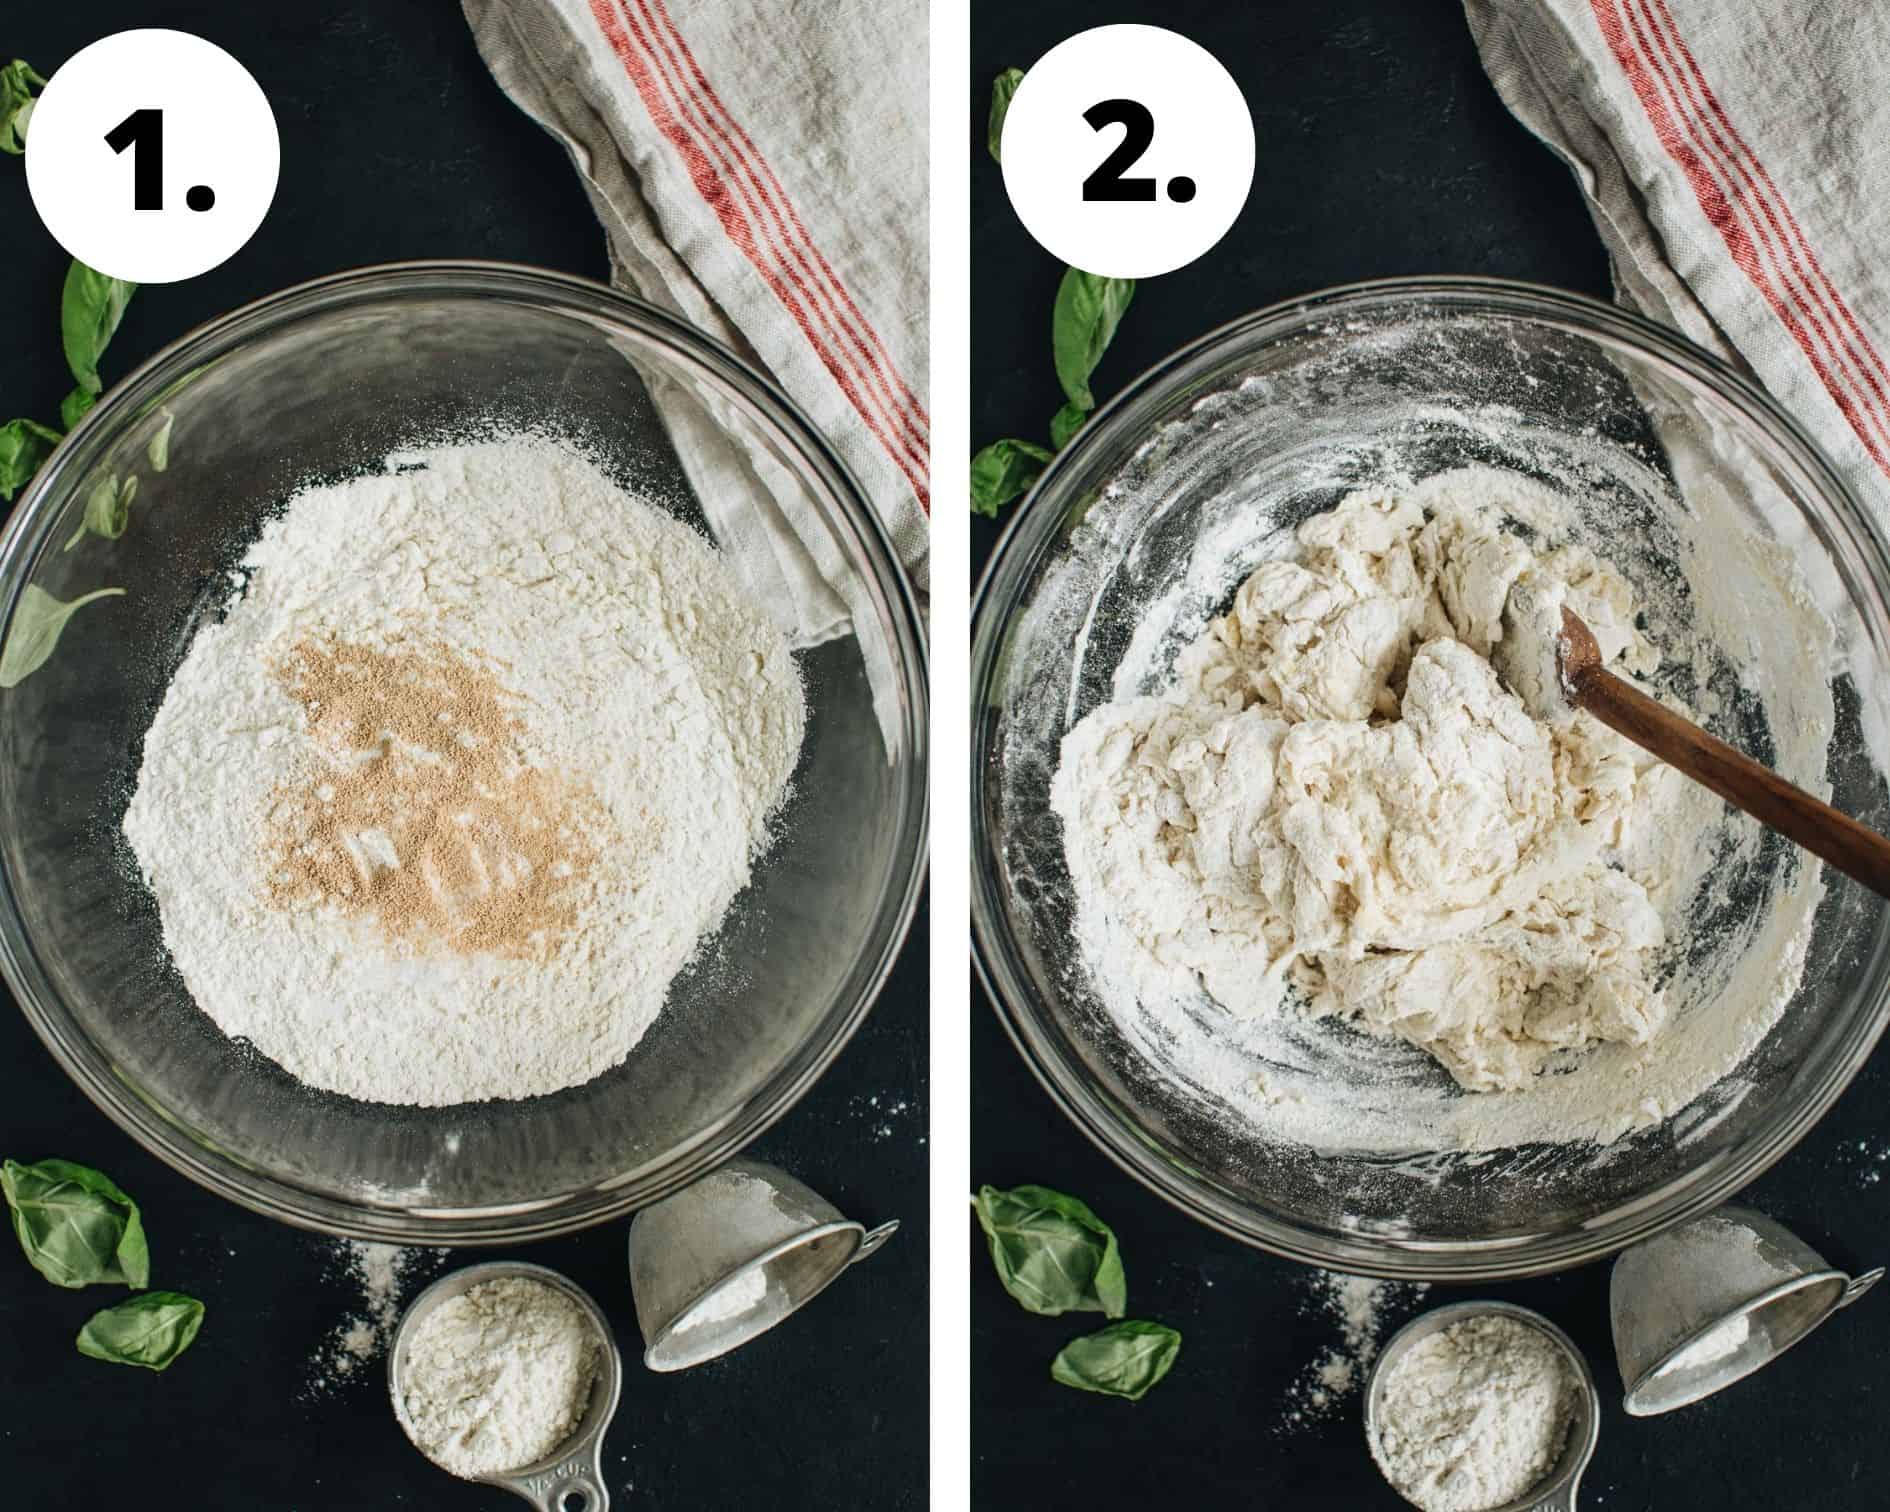 Skillet pizza recipe process steps 1 and 2.